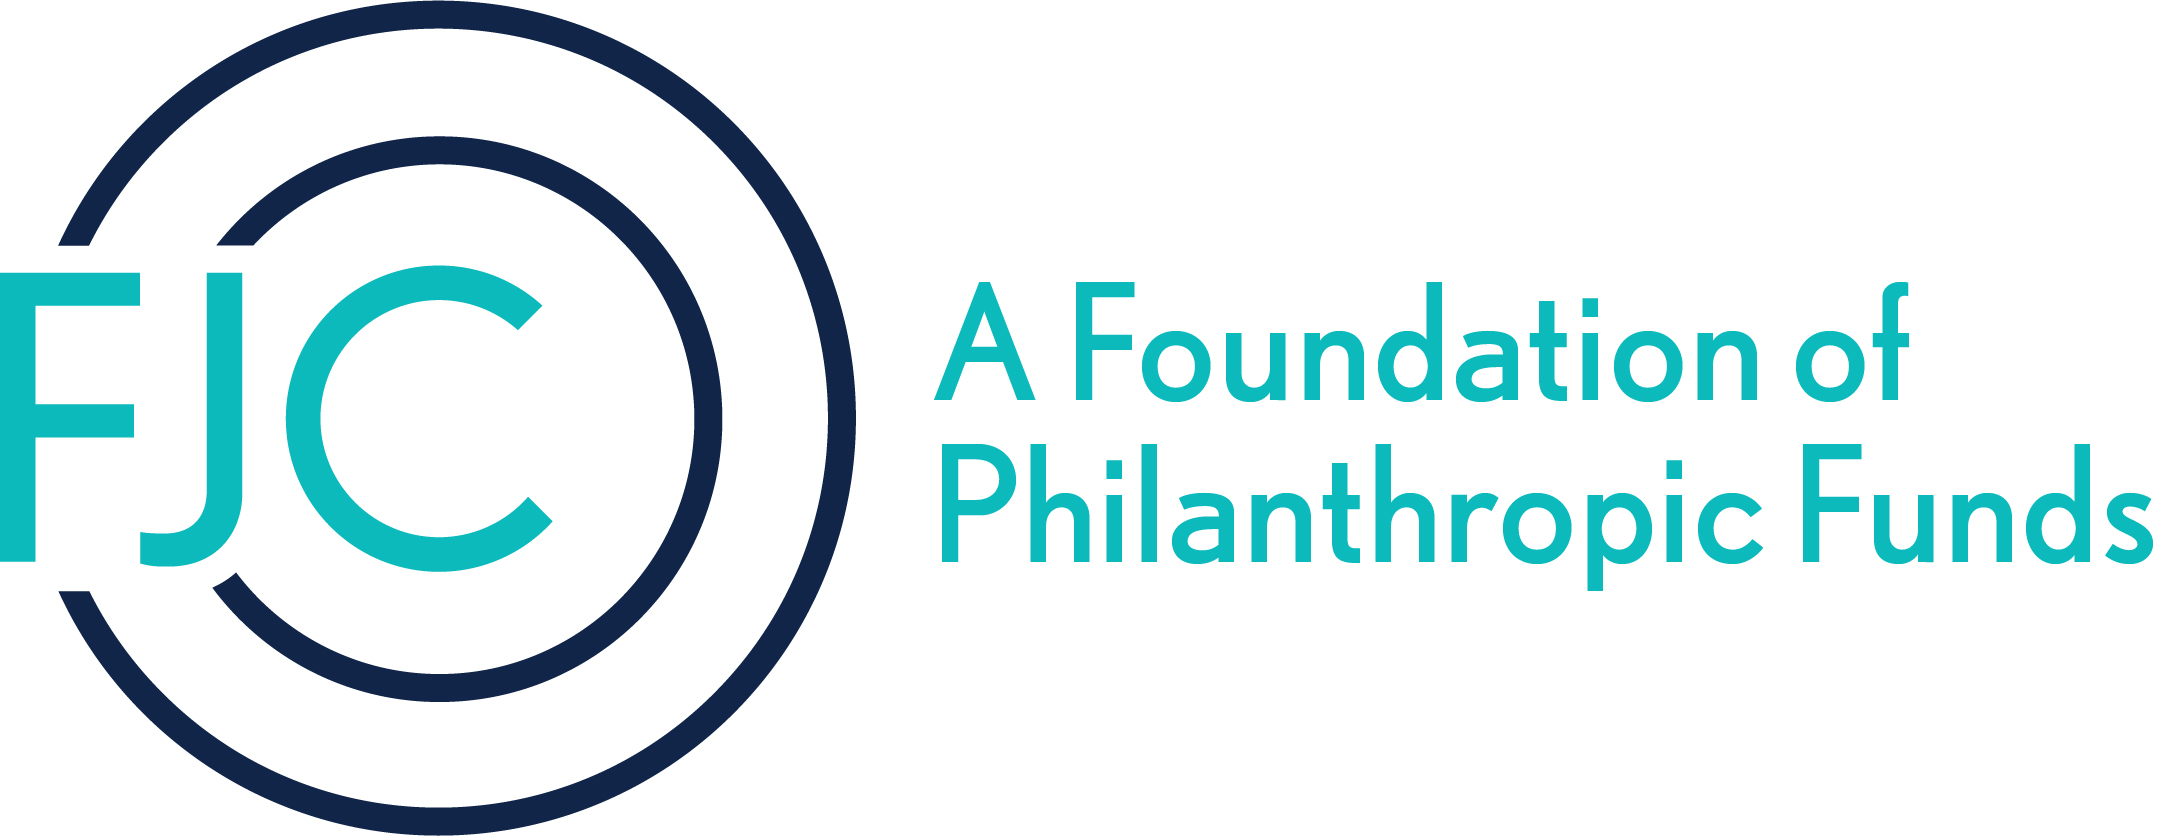 FJC A Foundation of Philanthropic Funds